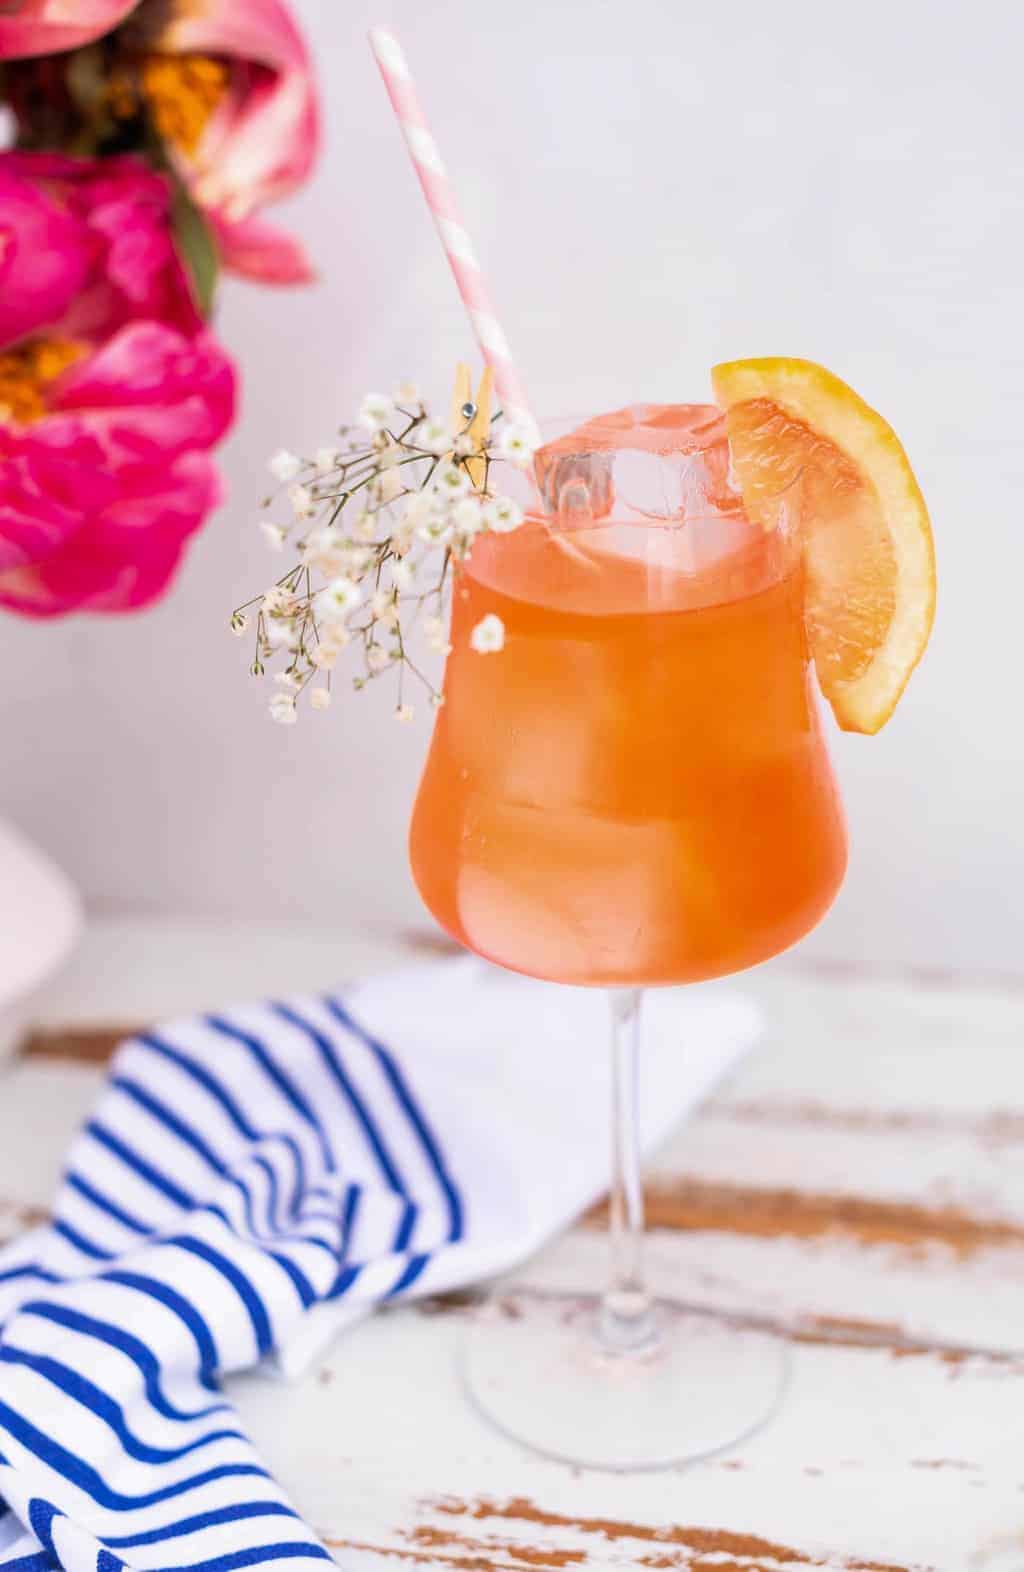 photo of the Elderflower Aperol Spritz cocktail recipe garnished with baby breath by top Houston lifestyle blogger Ashley Rose of Sugar & Cloth